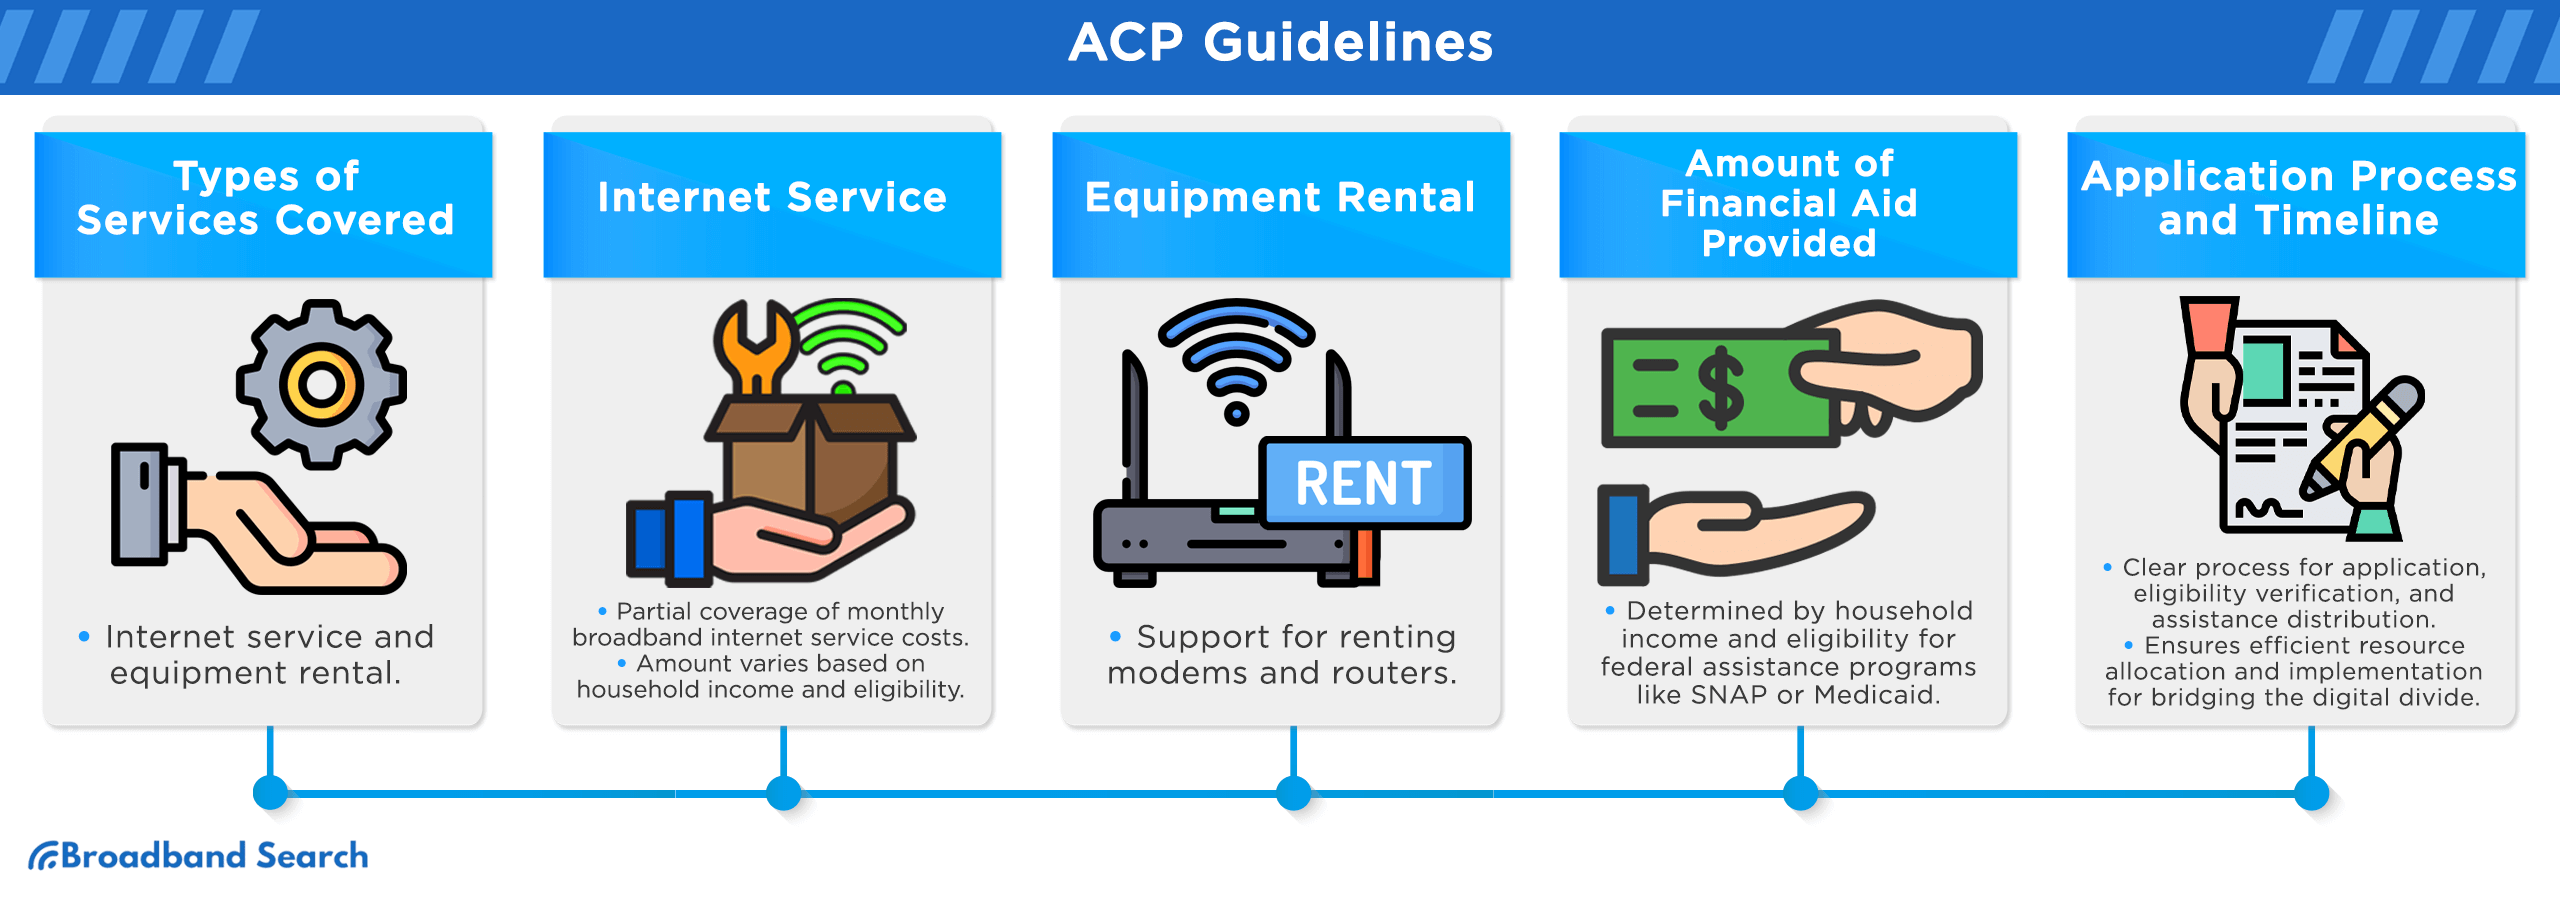 List of ACP guidelines